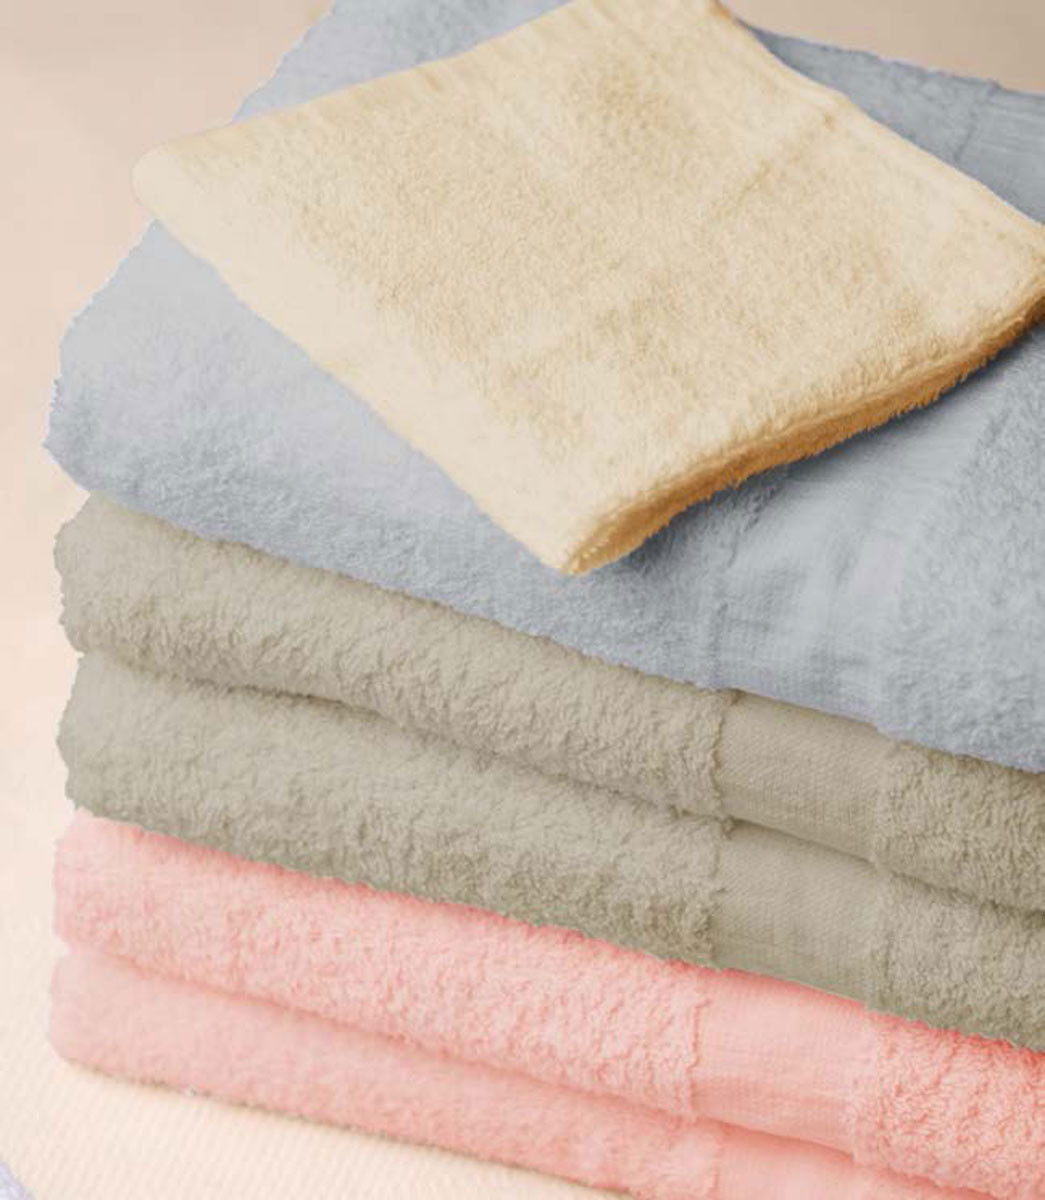 Are the Bone Color Economy 16s towels made from American cotton?